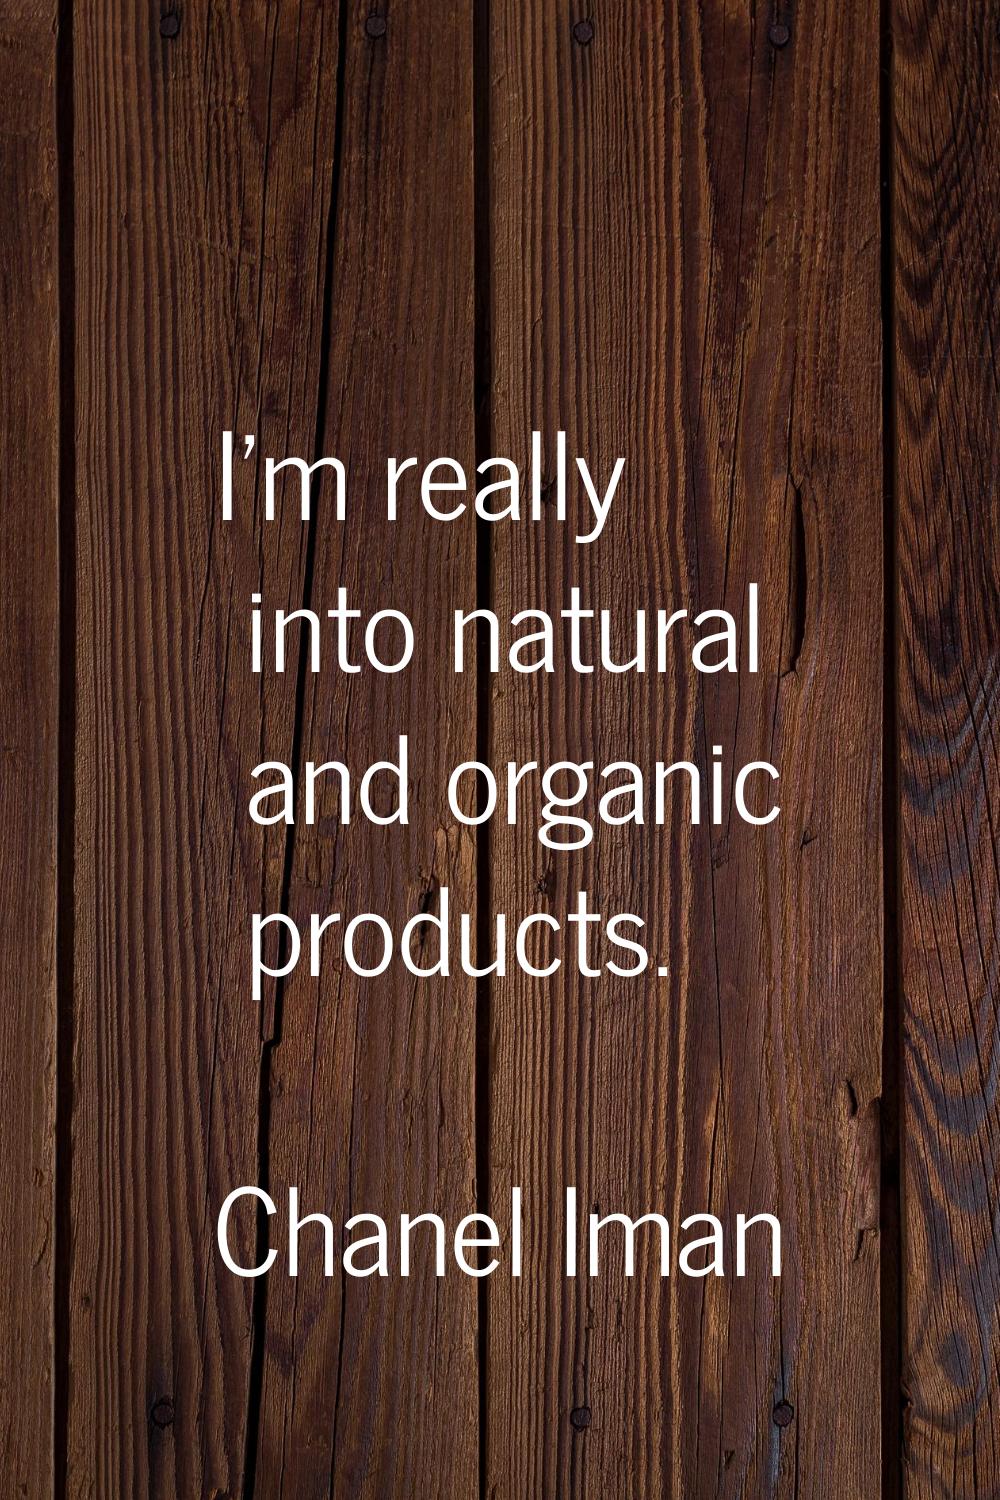 I'm really into natural and organic products.